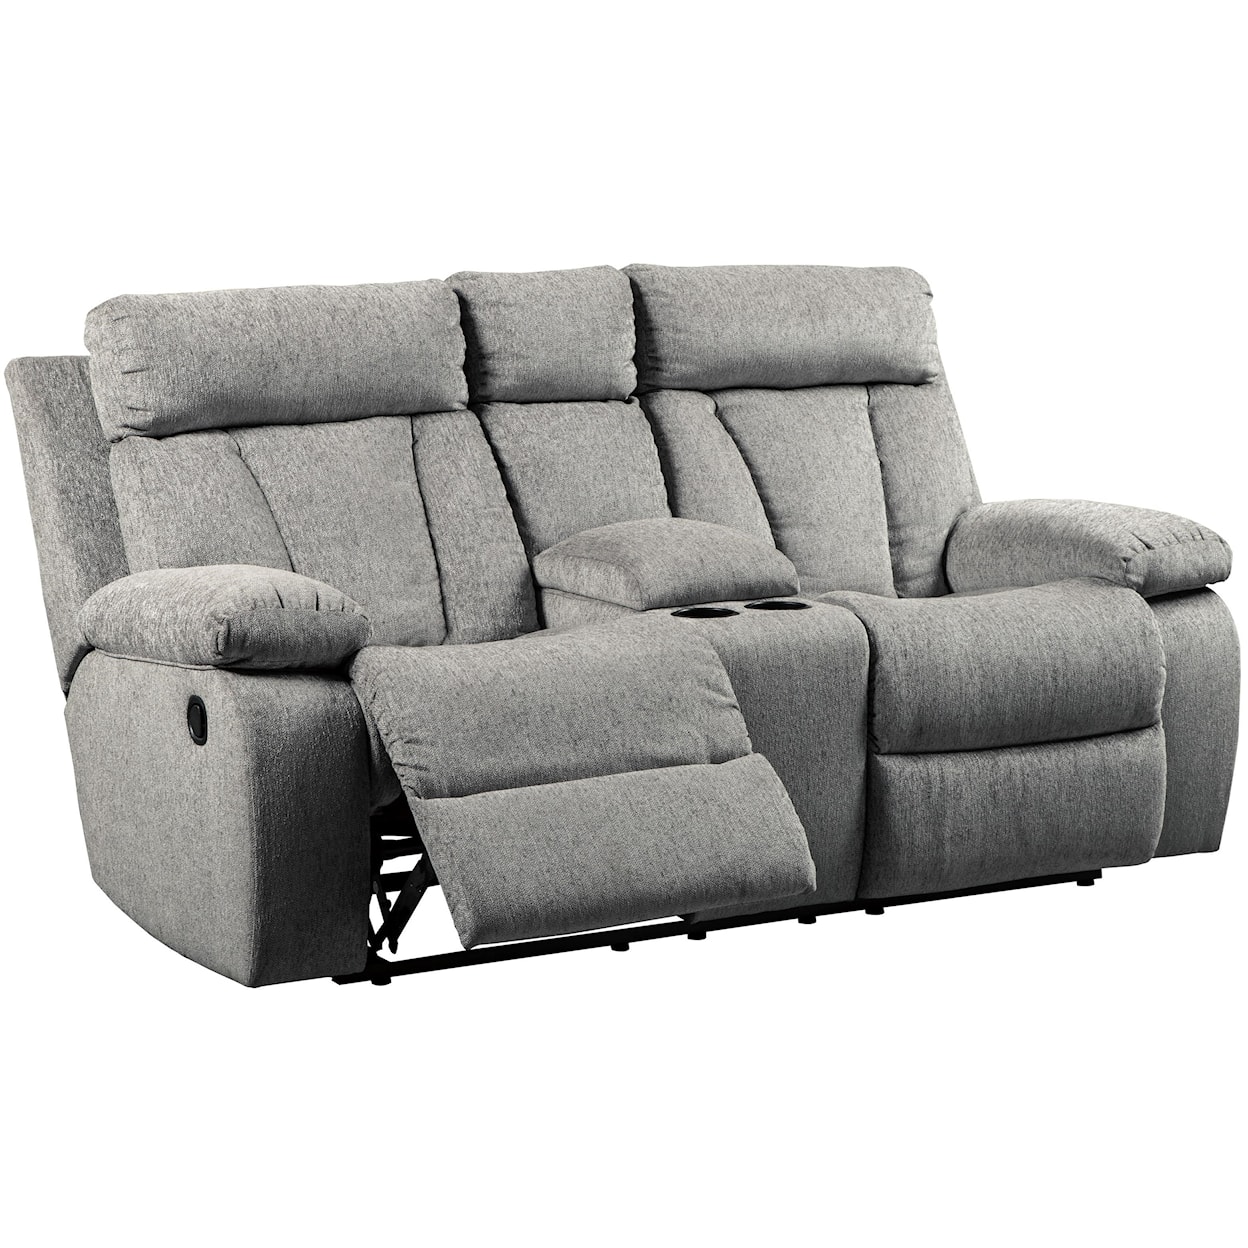 Ashley Signature Design Mitchiner Double Reclining Love Seat